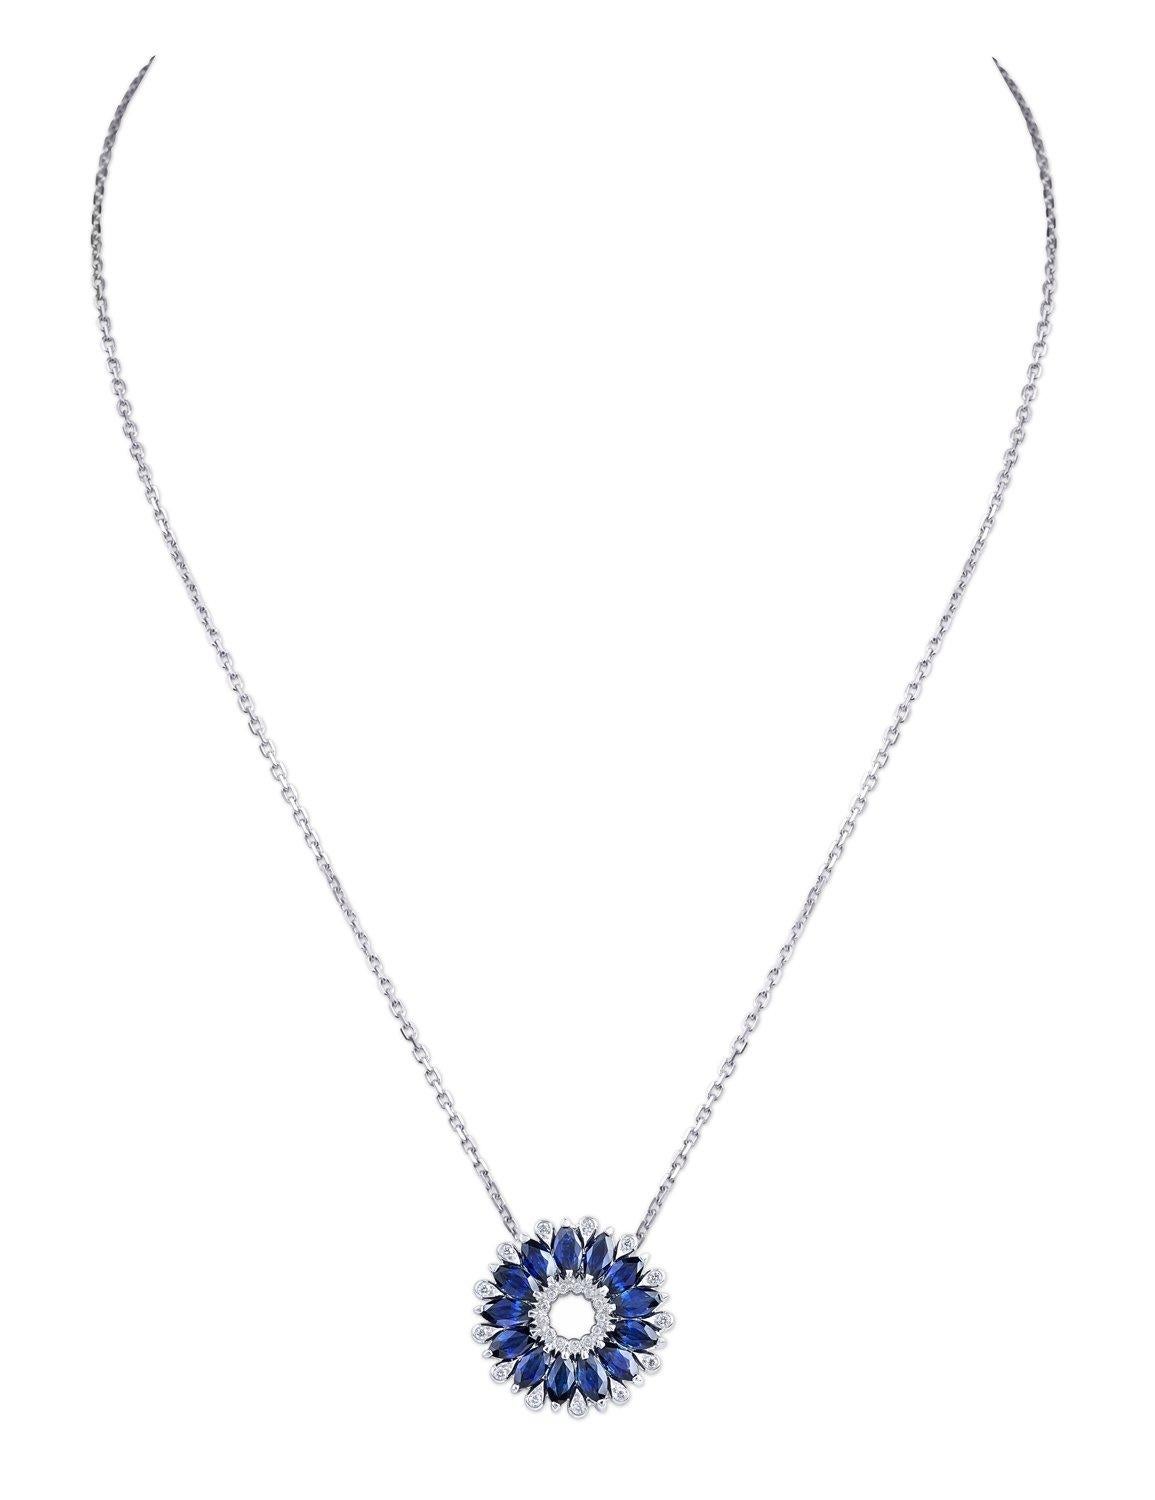 An elegant wreath of petals suspended on a delicate chain is bought to life with captivating marquise cut blue sapphires surrounded by brilliant cut diamonds.

Blue Sapphires Petali Pendant by Niquesa details:

- 18 karat White Gold
- 4.41 Carat